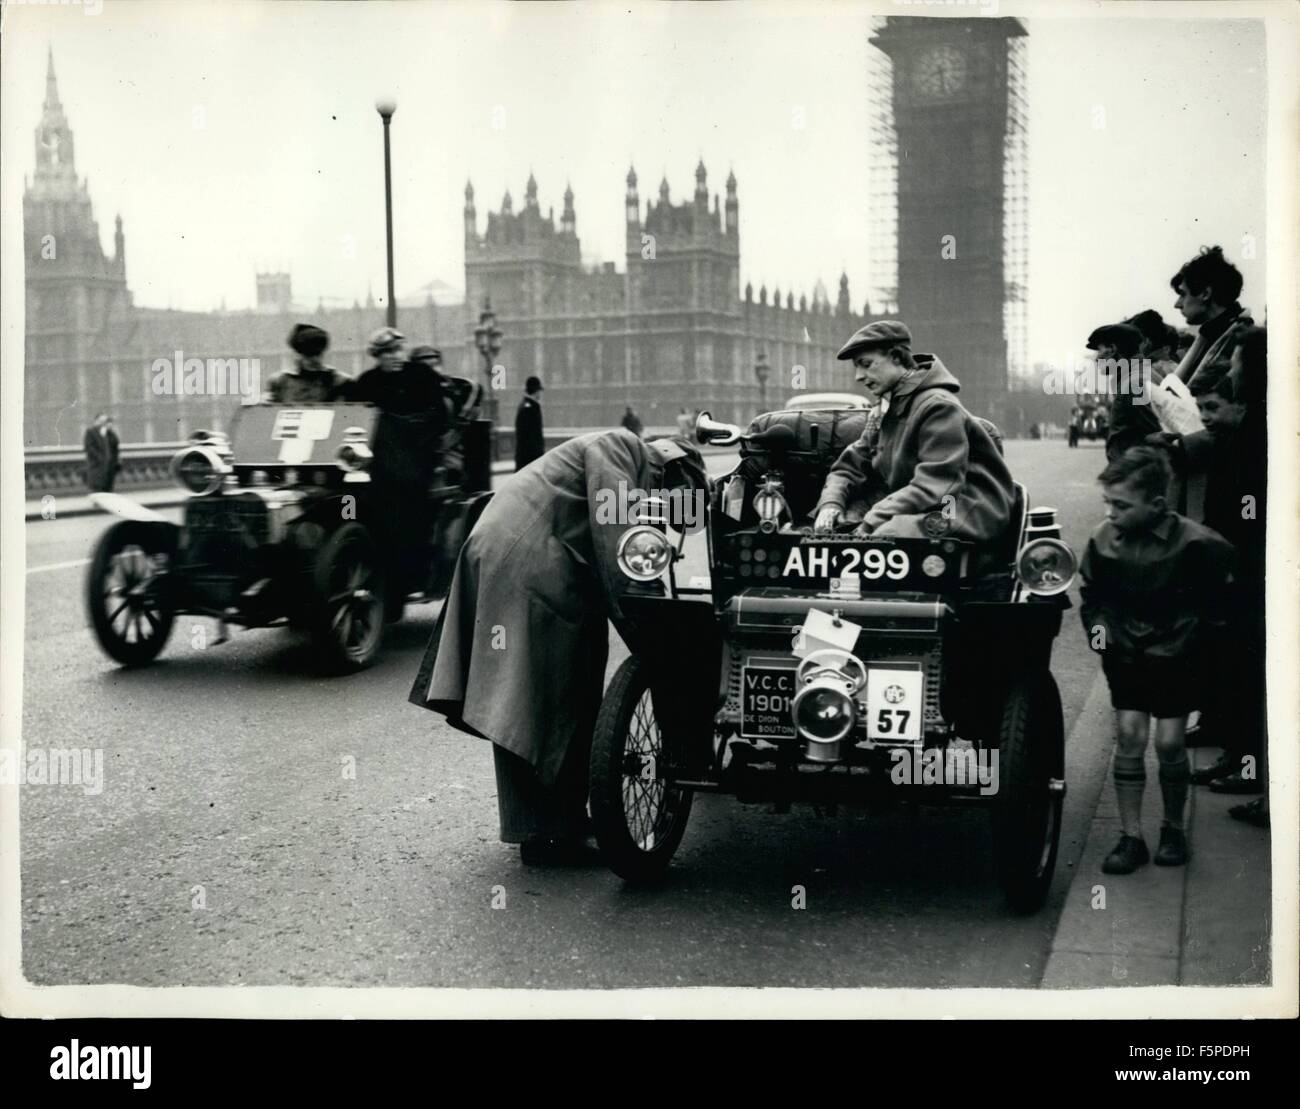 1954 - Annual Veteran Car Run To Brighton: The annual Veteran Car Run from London to Brighton, organised by the Royal Automobile Club, started this morning from Hyde Park. Photo Shows:- Mr and Mrs. Reynolds, in a 1901 De Dion Bouton - had a spot of trouble on Westminster Bridge. The car was entered by P.J Wellingham. © Keystone Pictures USA/ZUMAPRESS.com/Alamy Live News Stock Photo